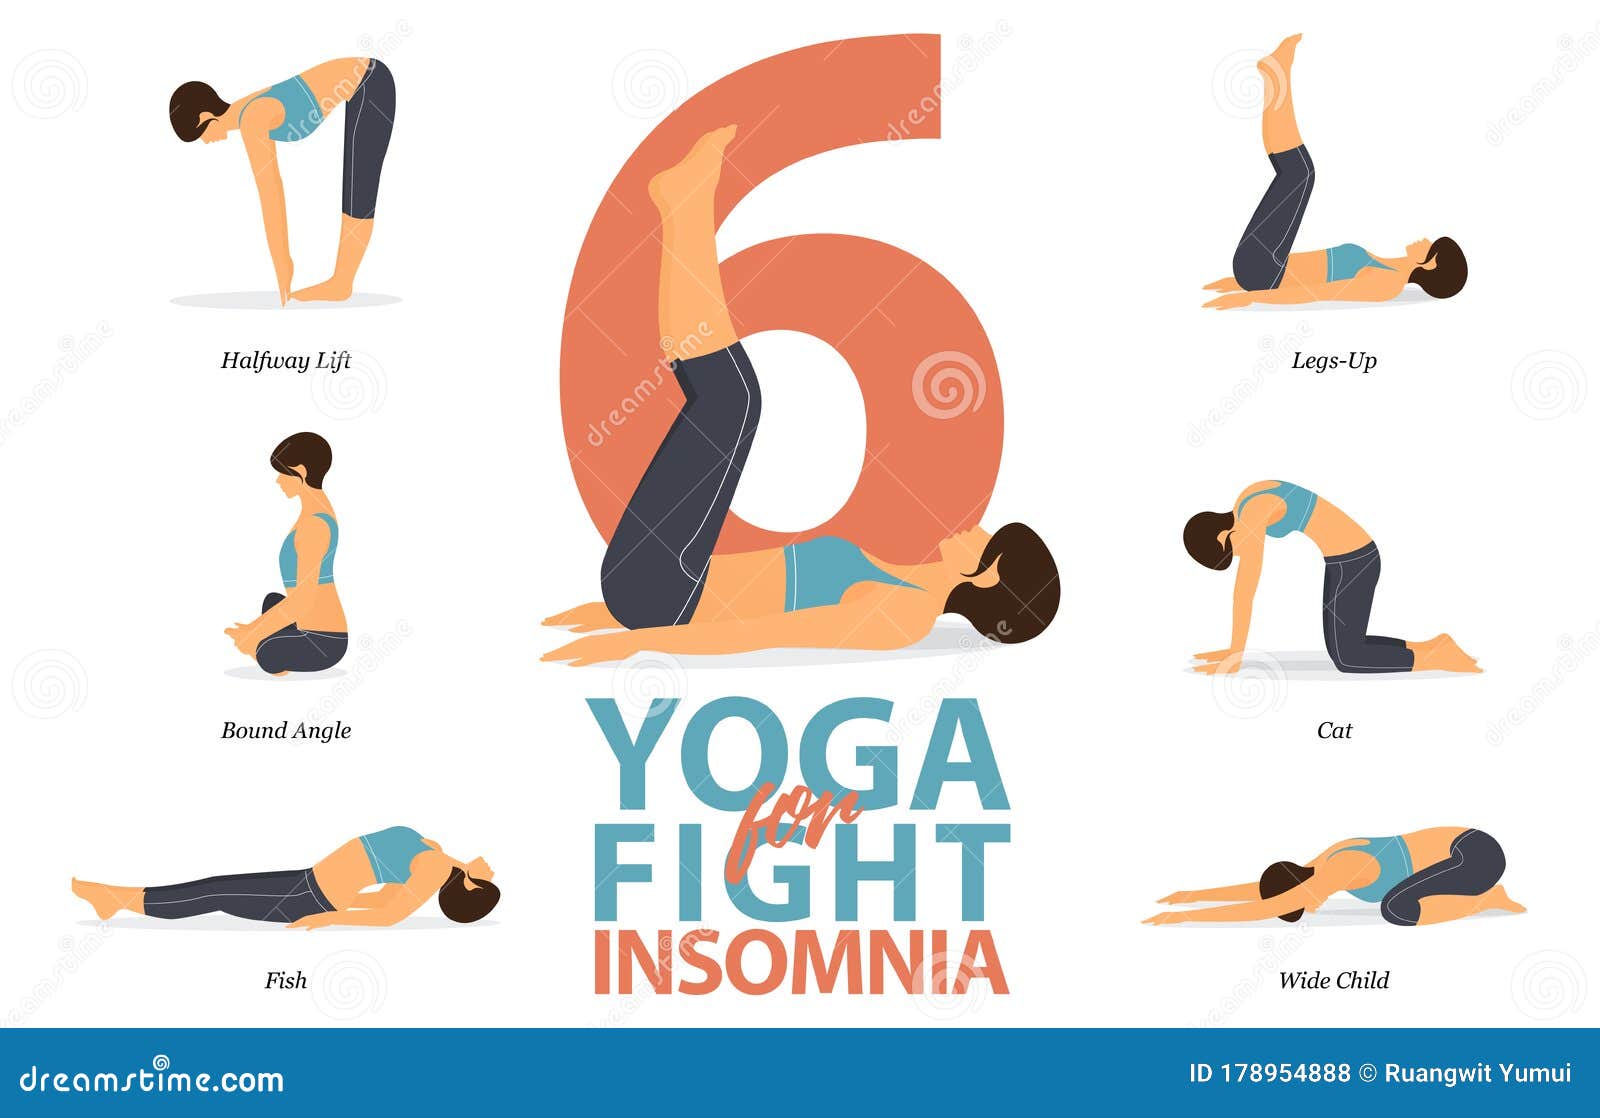 Infographic 12 Yoga Poses Workout Home Stock Vector (Royalty Free)  2008299701 | Shutterstock